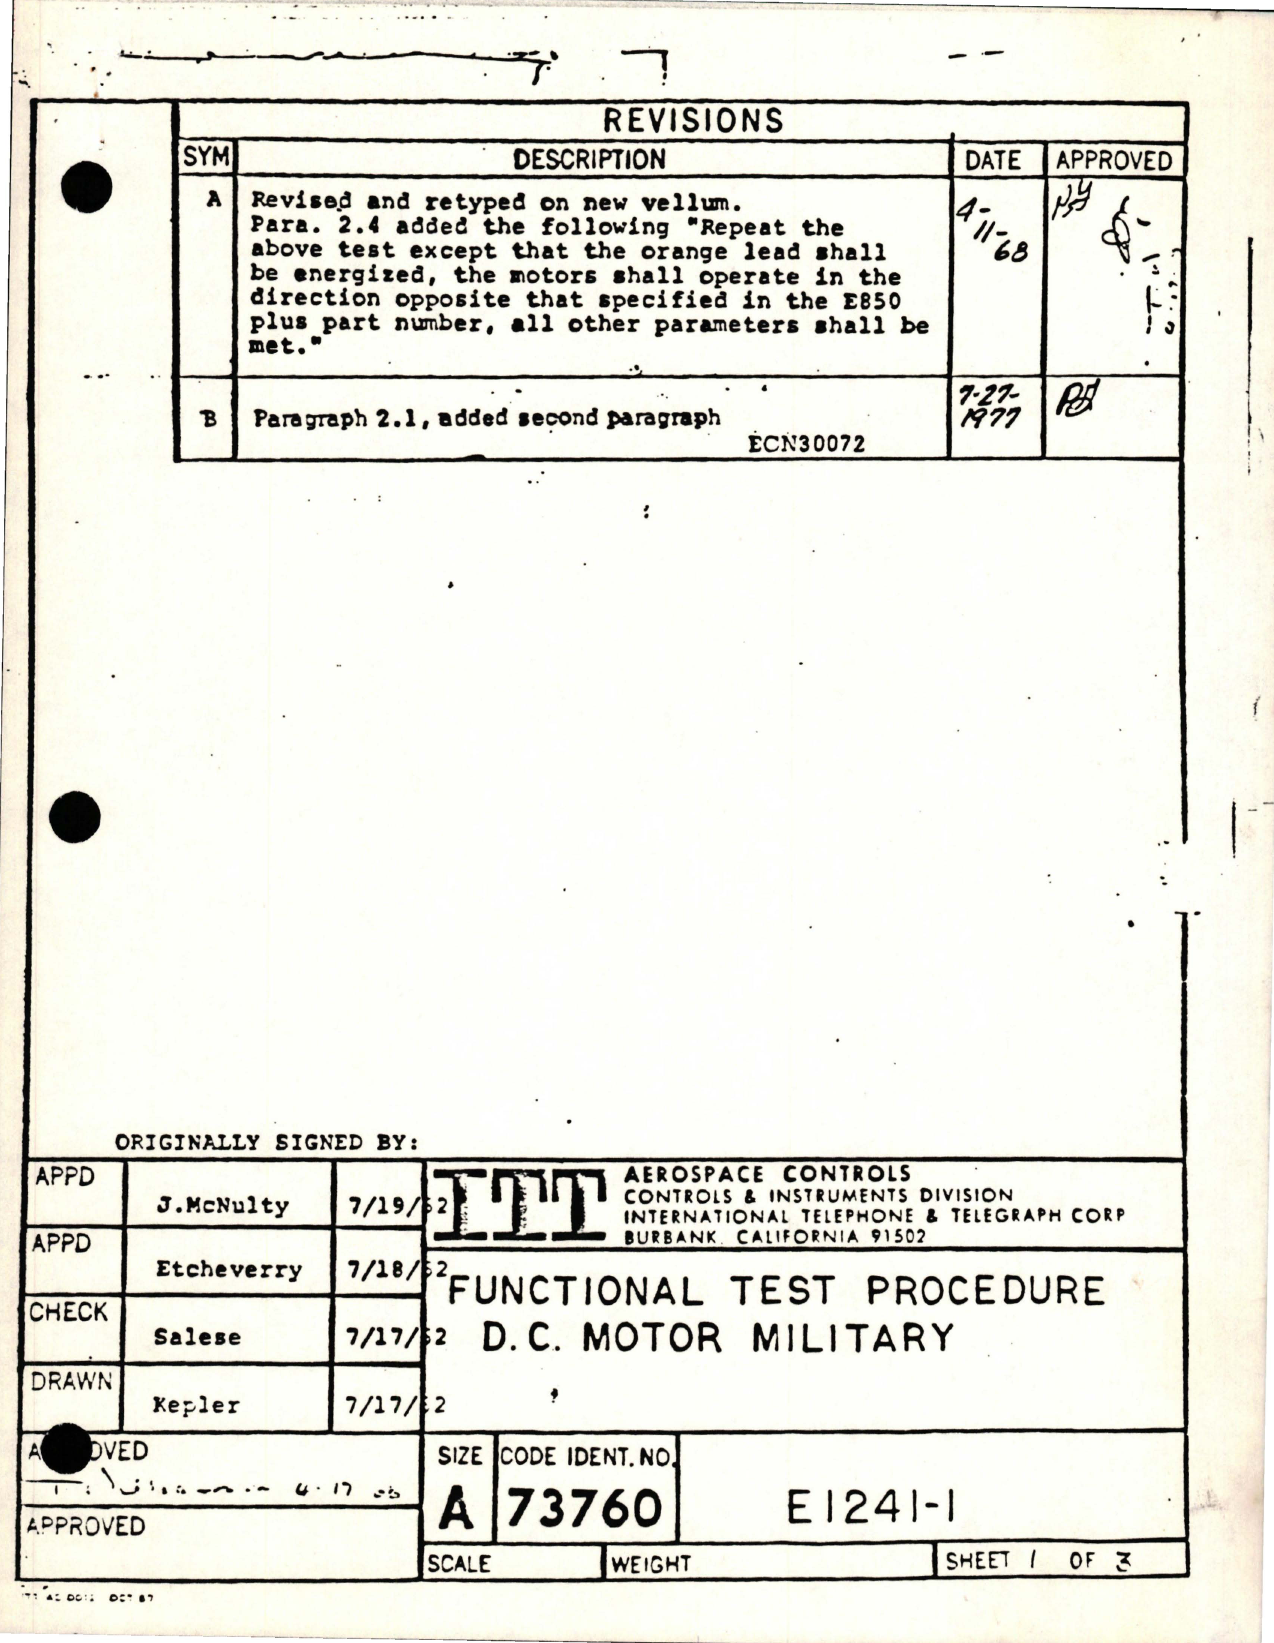 Sample page 1 from AirCorps Library document: Functional Test Procedure for DC Motor